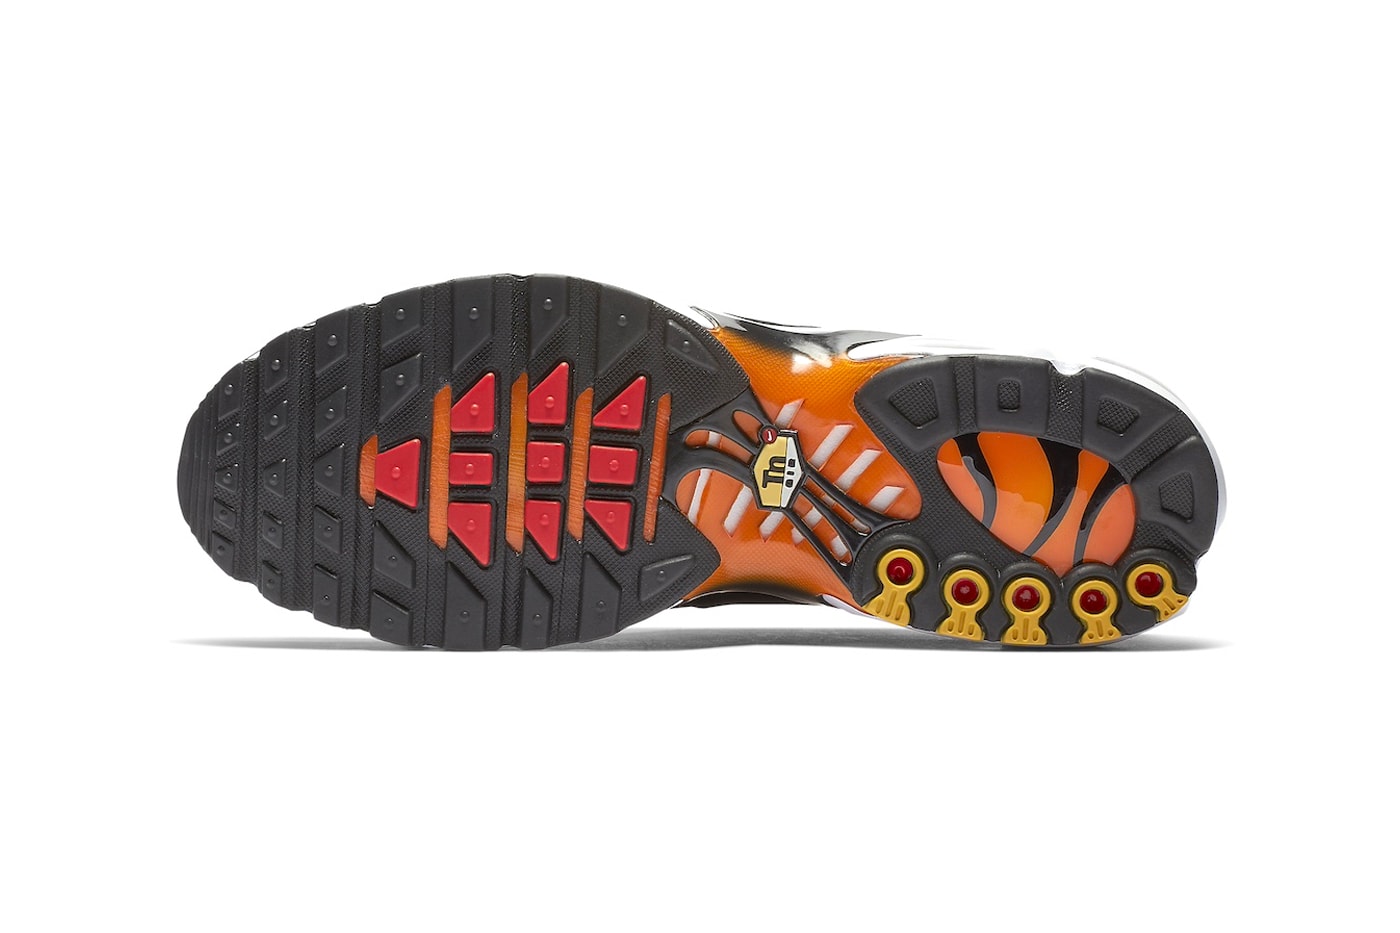 Nike Air Max Plus "Sunset" Is Returning Later This Year Fall 2024 HF0552-001 Black/Pimento-Bright Ceramic-Resin-White